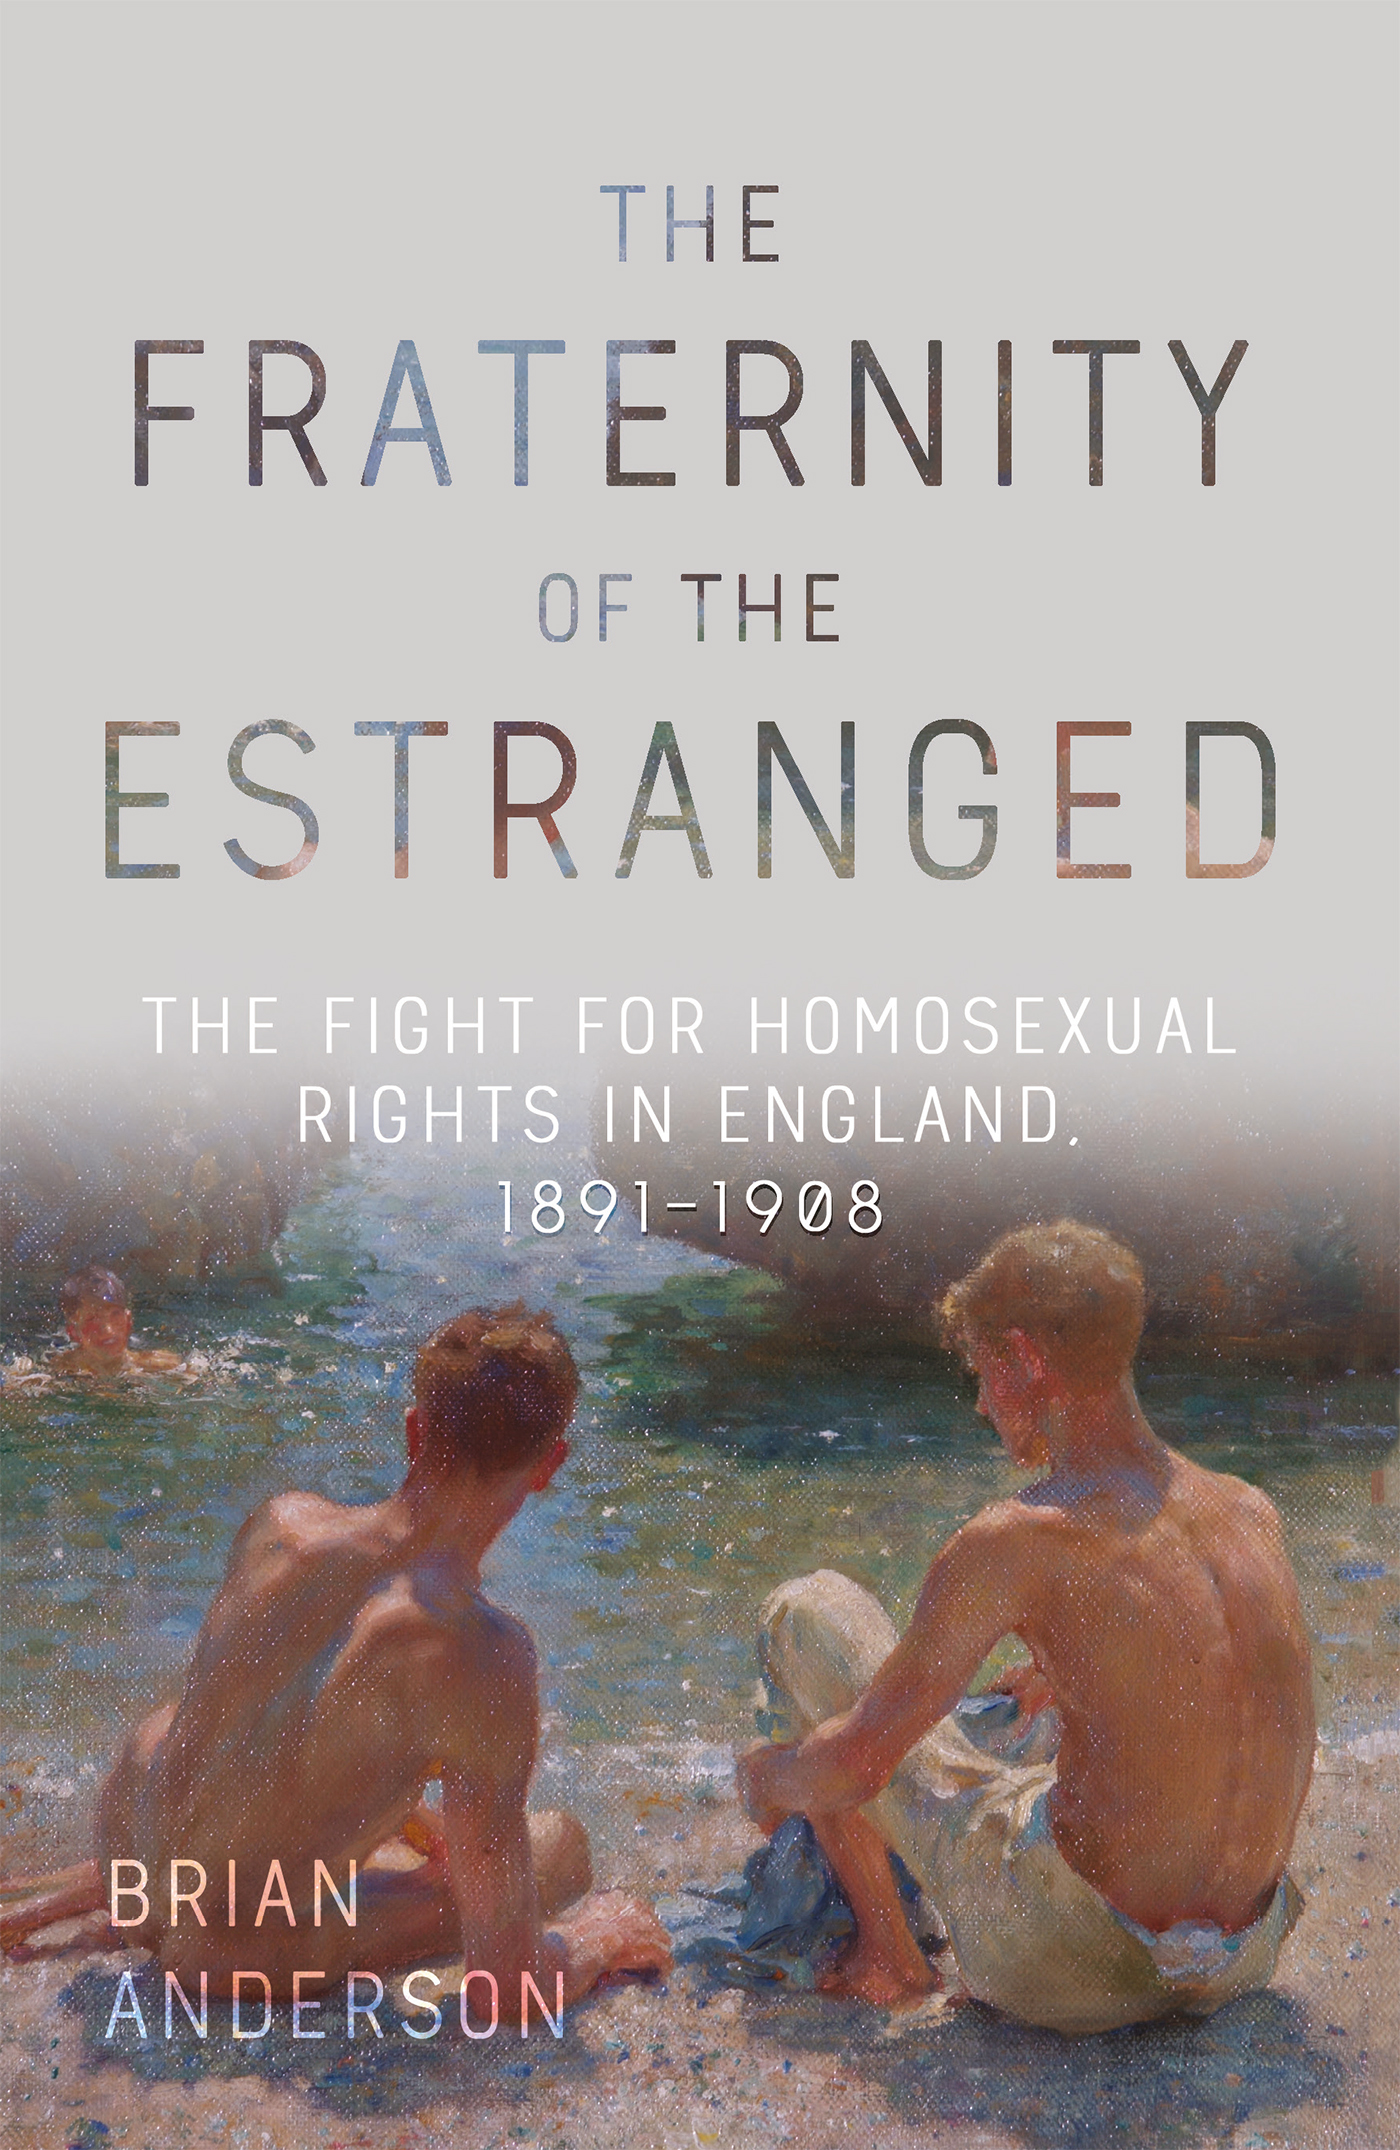 The Fraternity of the Estranged The Fight for Homosexual Rights in England - photo 1